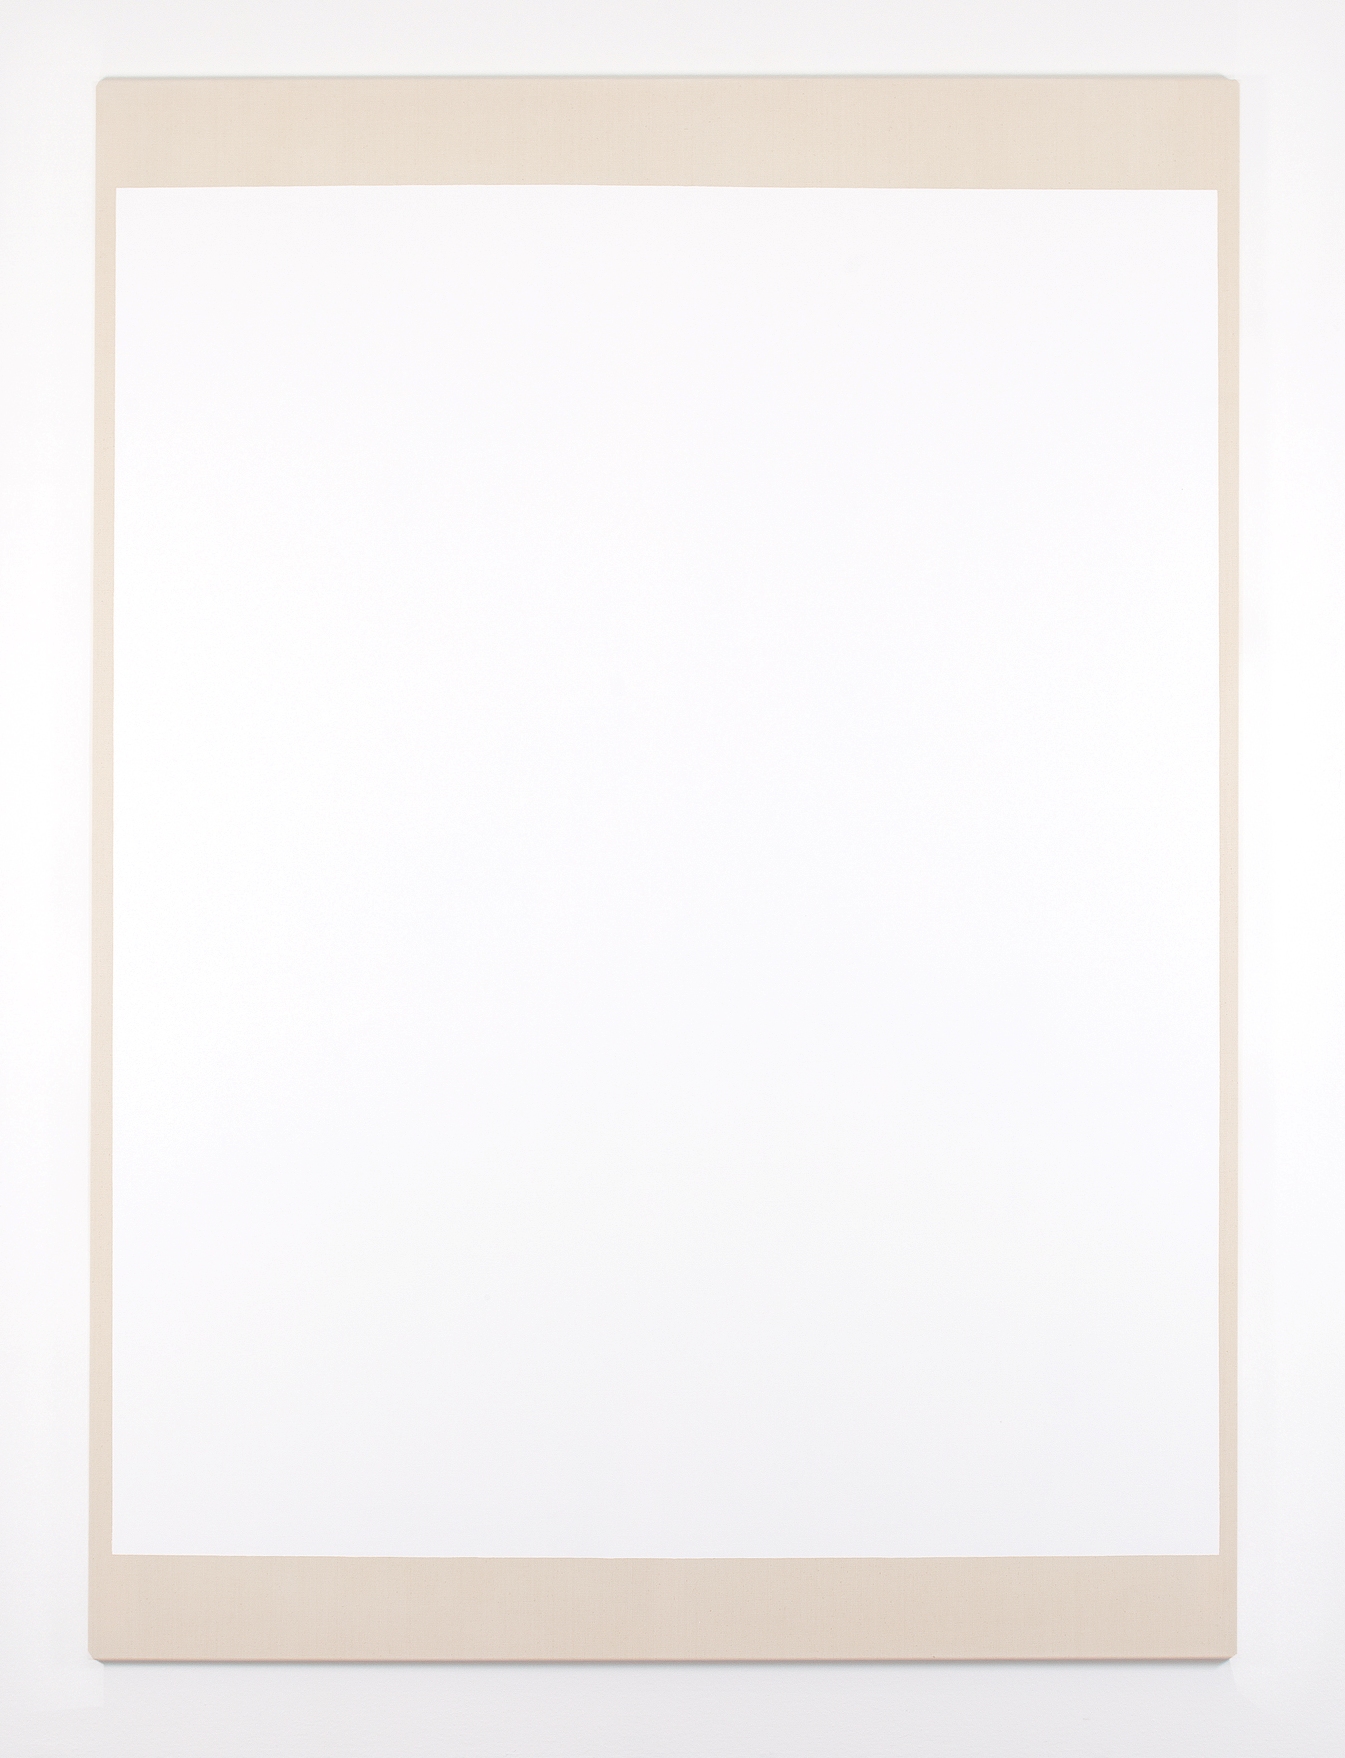 Holger Endres, untitled, 2011, acrylic on cotton, 210 x 150 cm